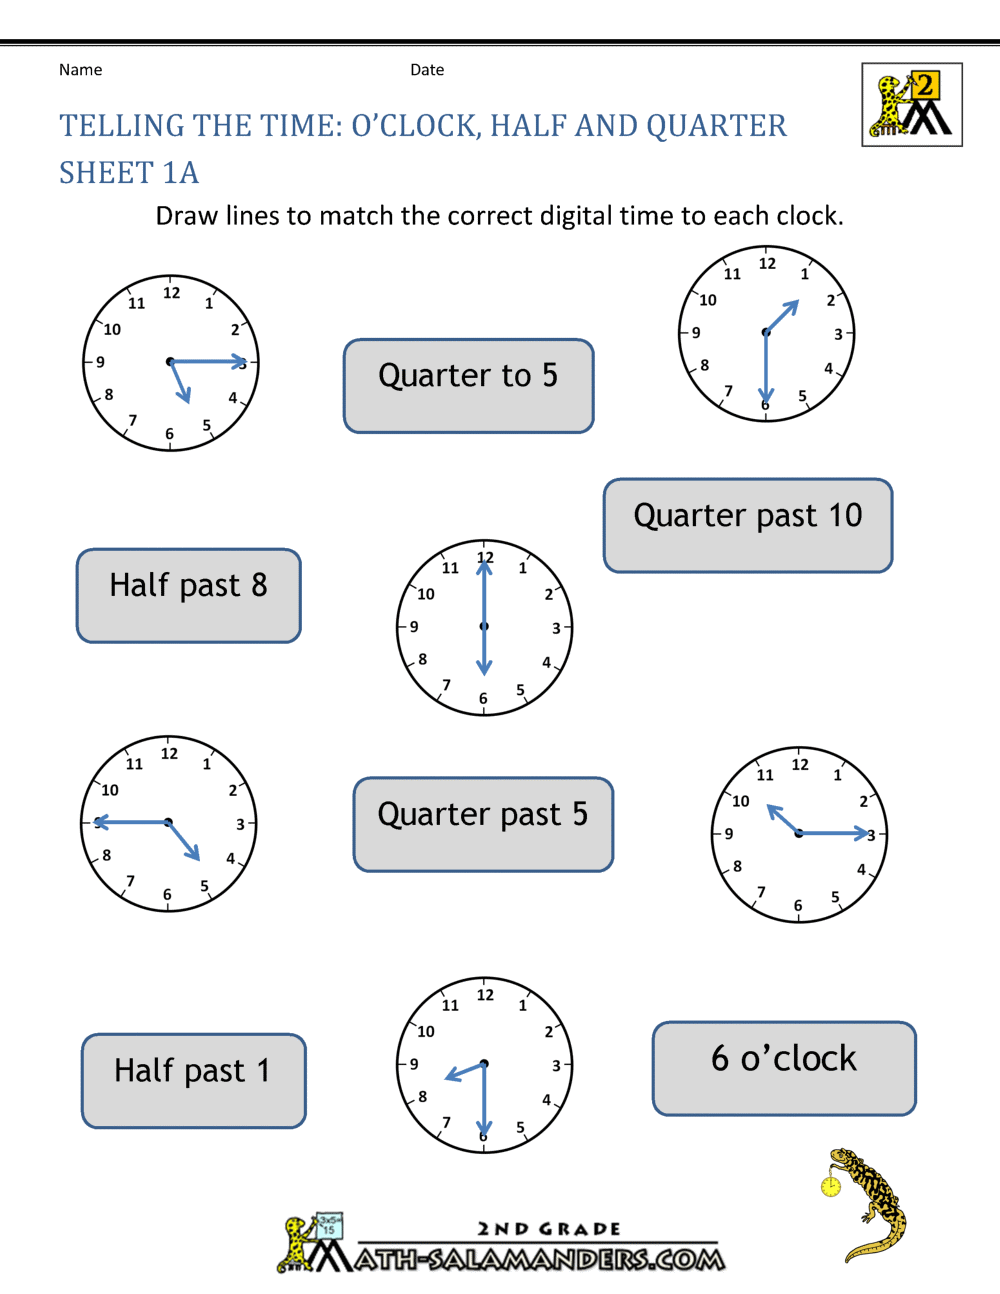 clock-worksheet-quarter-past-and-quarter-to-year-2-time-teaching